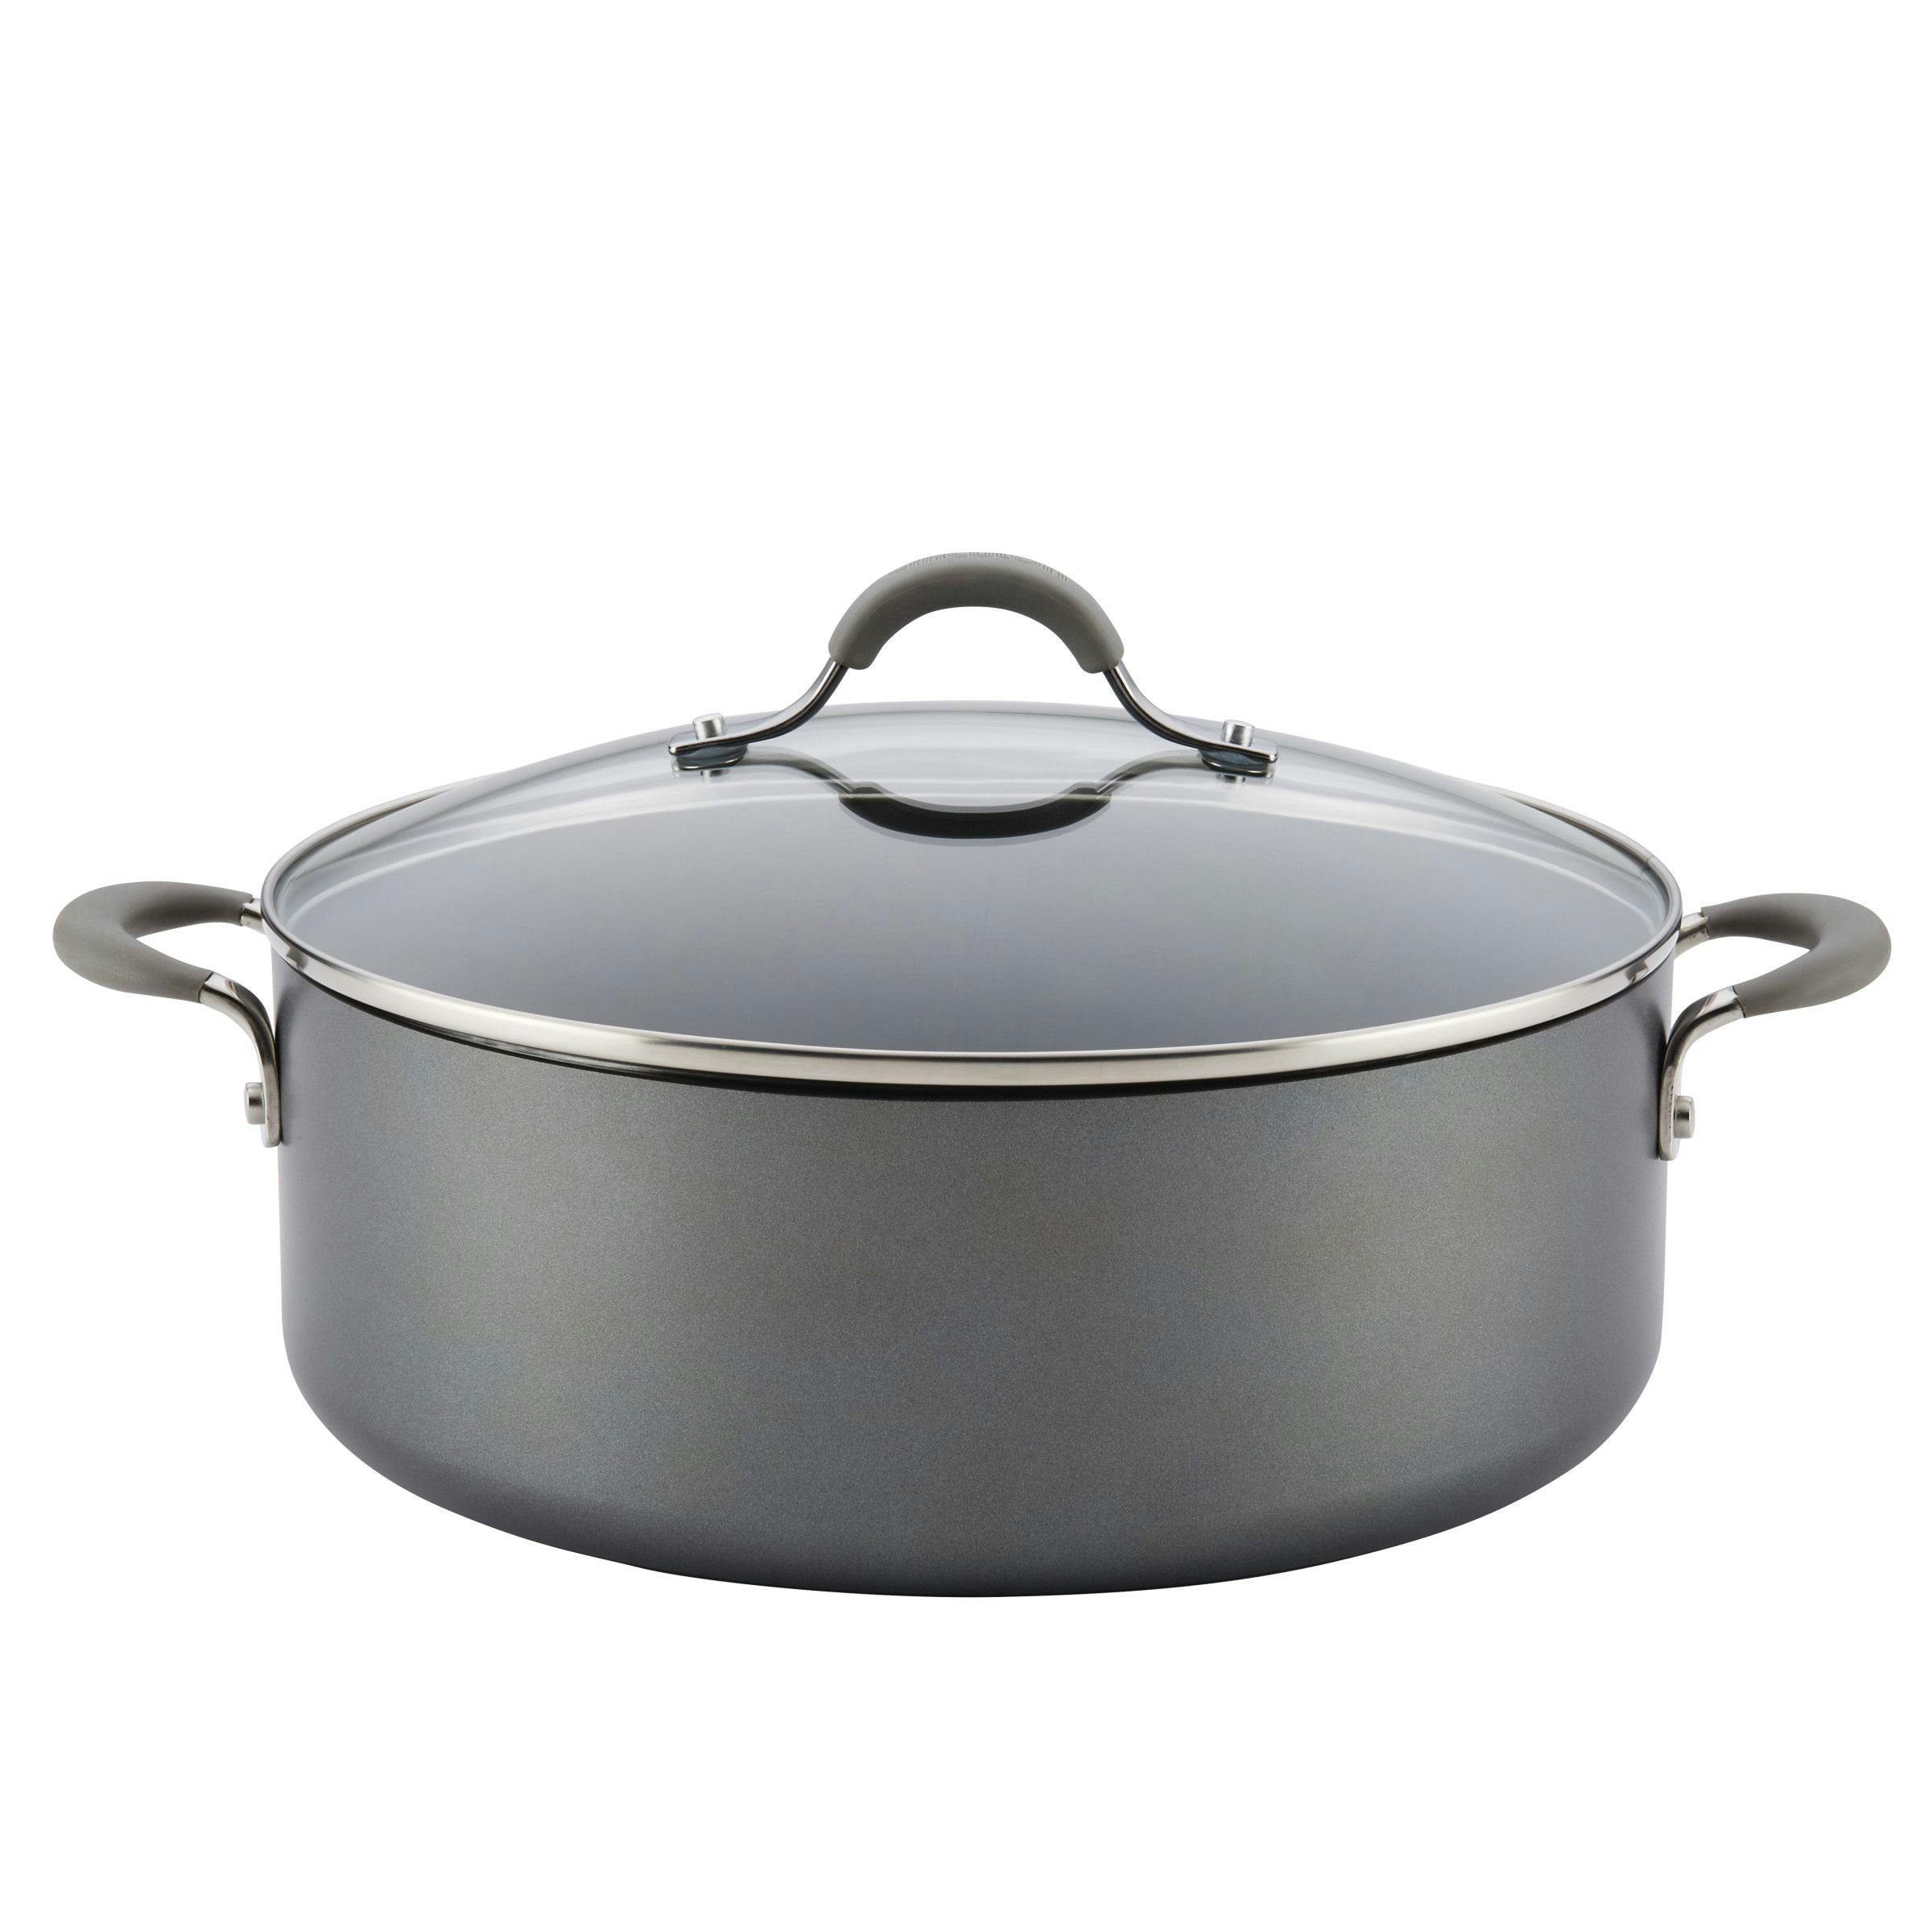 Circulon Elementum Hard-Anodized Nonstick Stockpot with Lid, 7.5-Quart, Oyster Gray